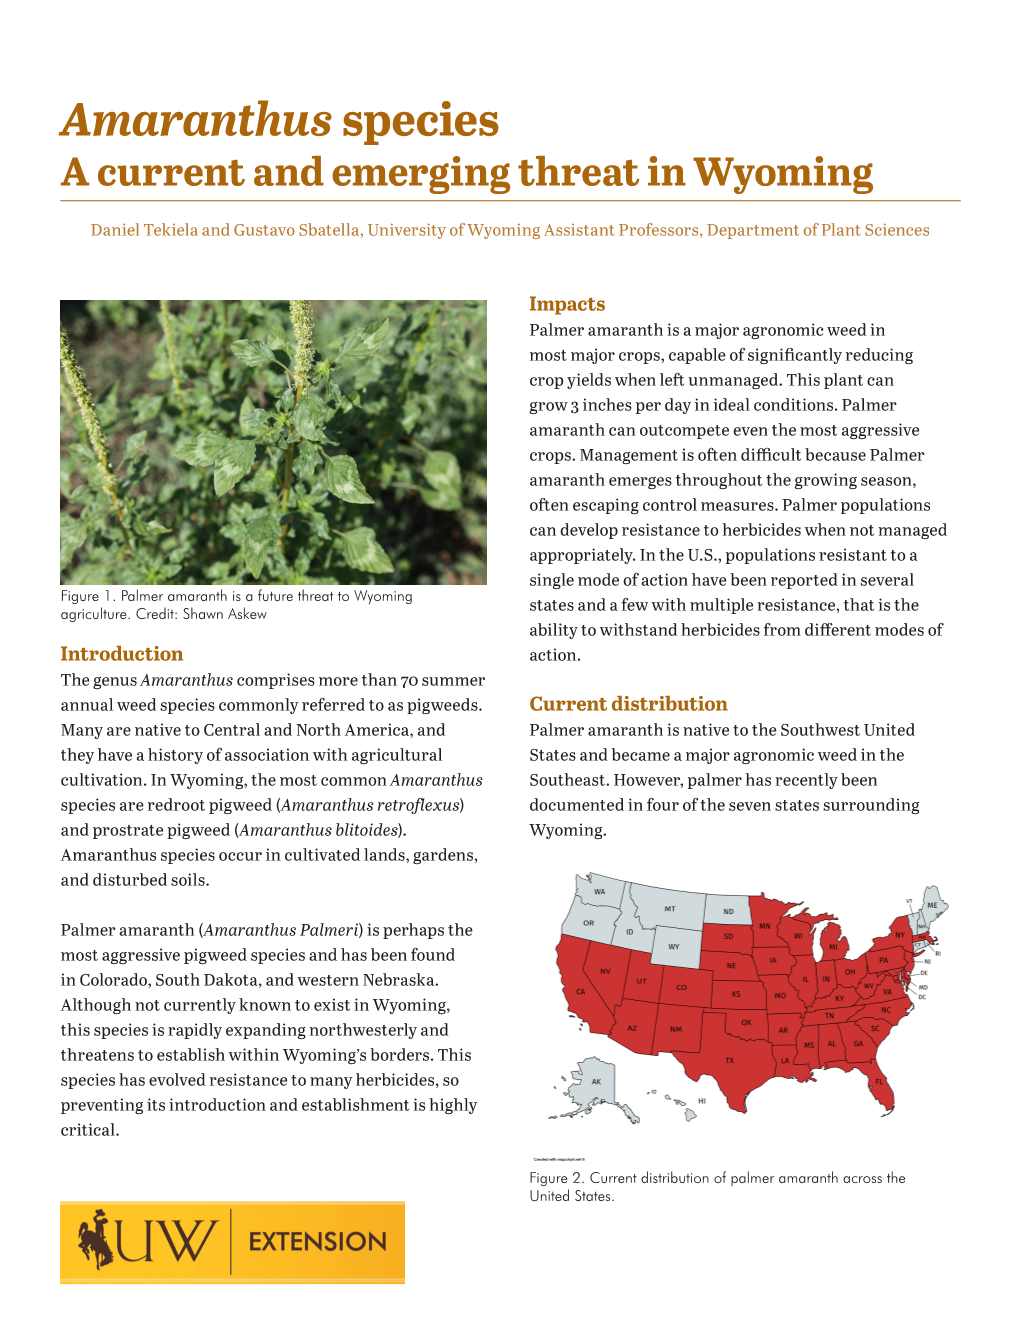 Amaranthus Species a Current and Emerging Threat in Wyoming